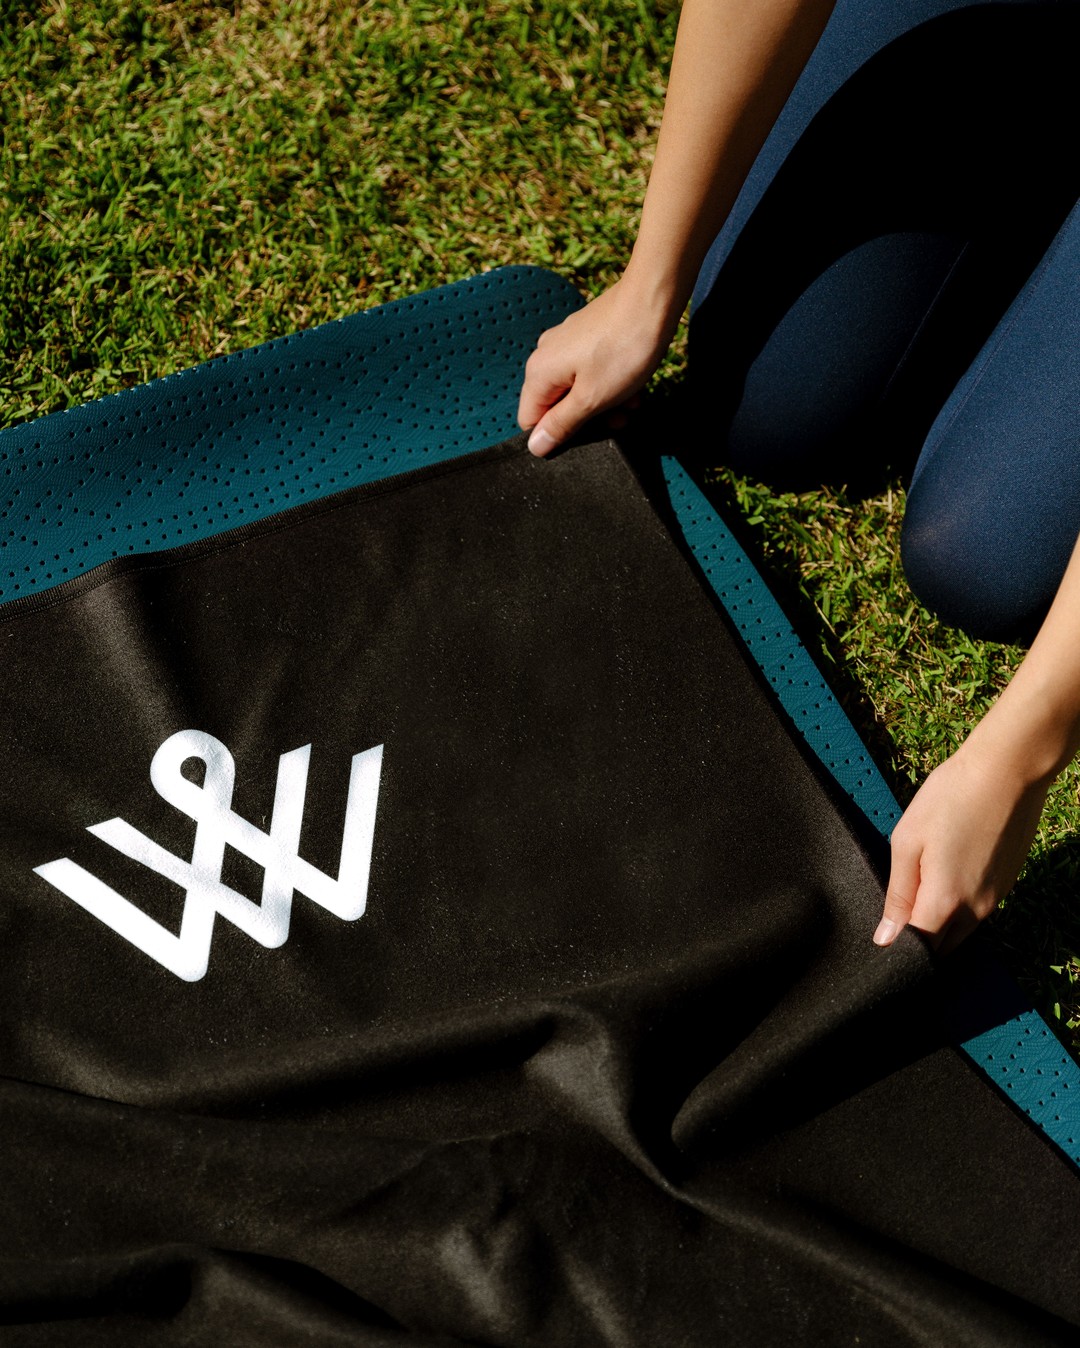 In need of a little extra motivation to get that next workout in? We're giving away fitness towels to the first 25 people who attend Fitness in the Park Saturday, January 4, from 8am to 9am